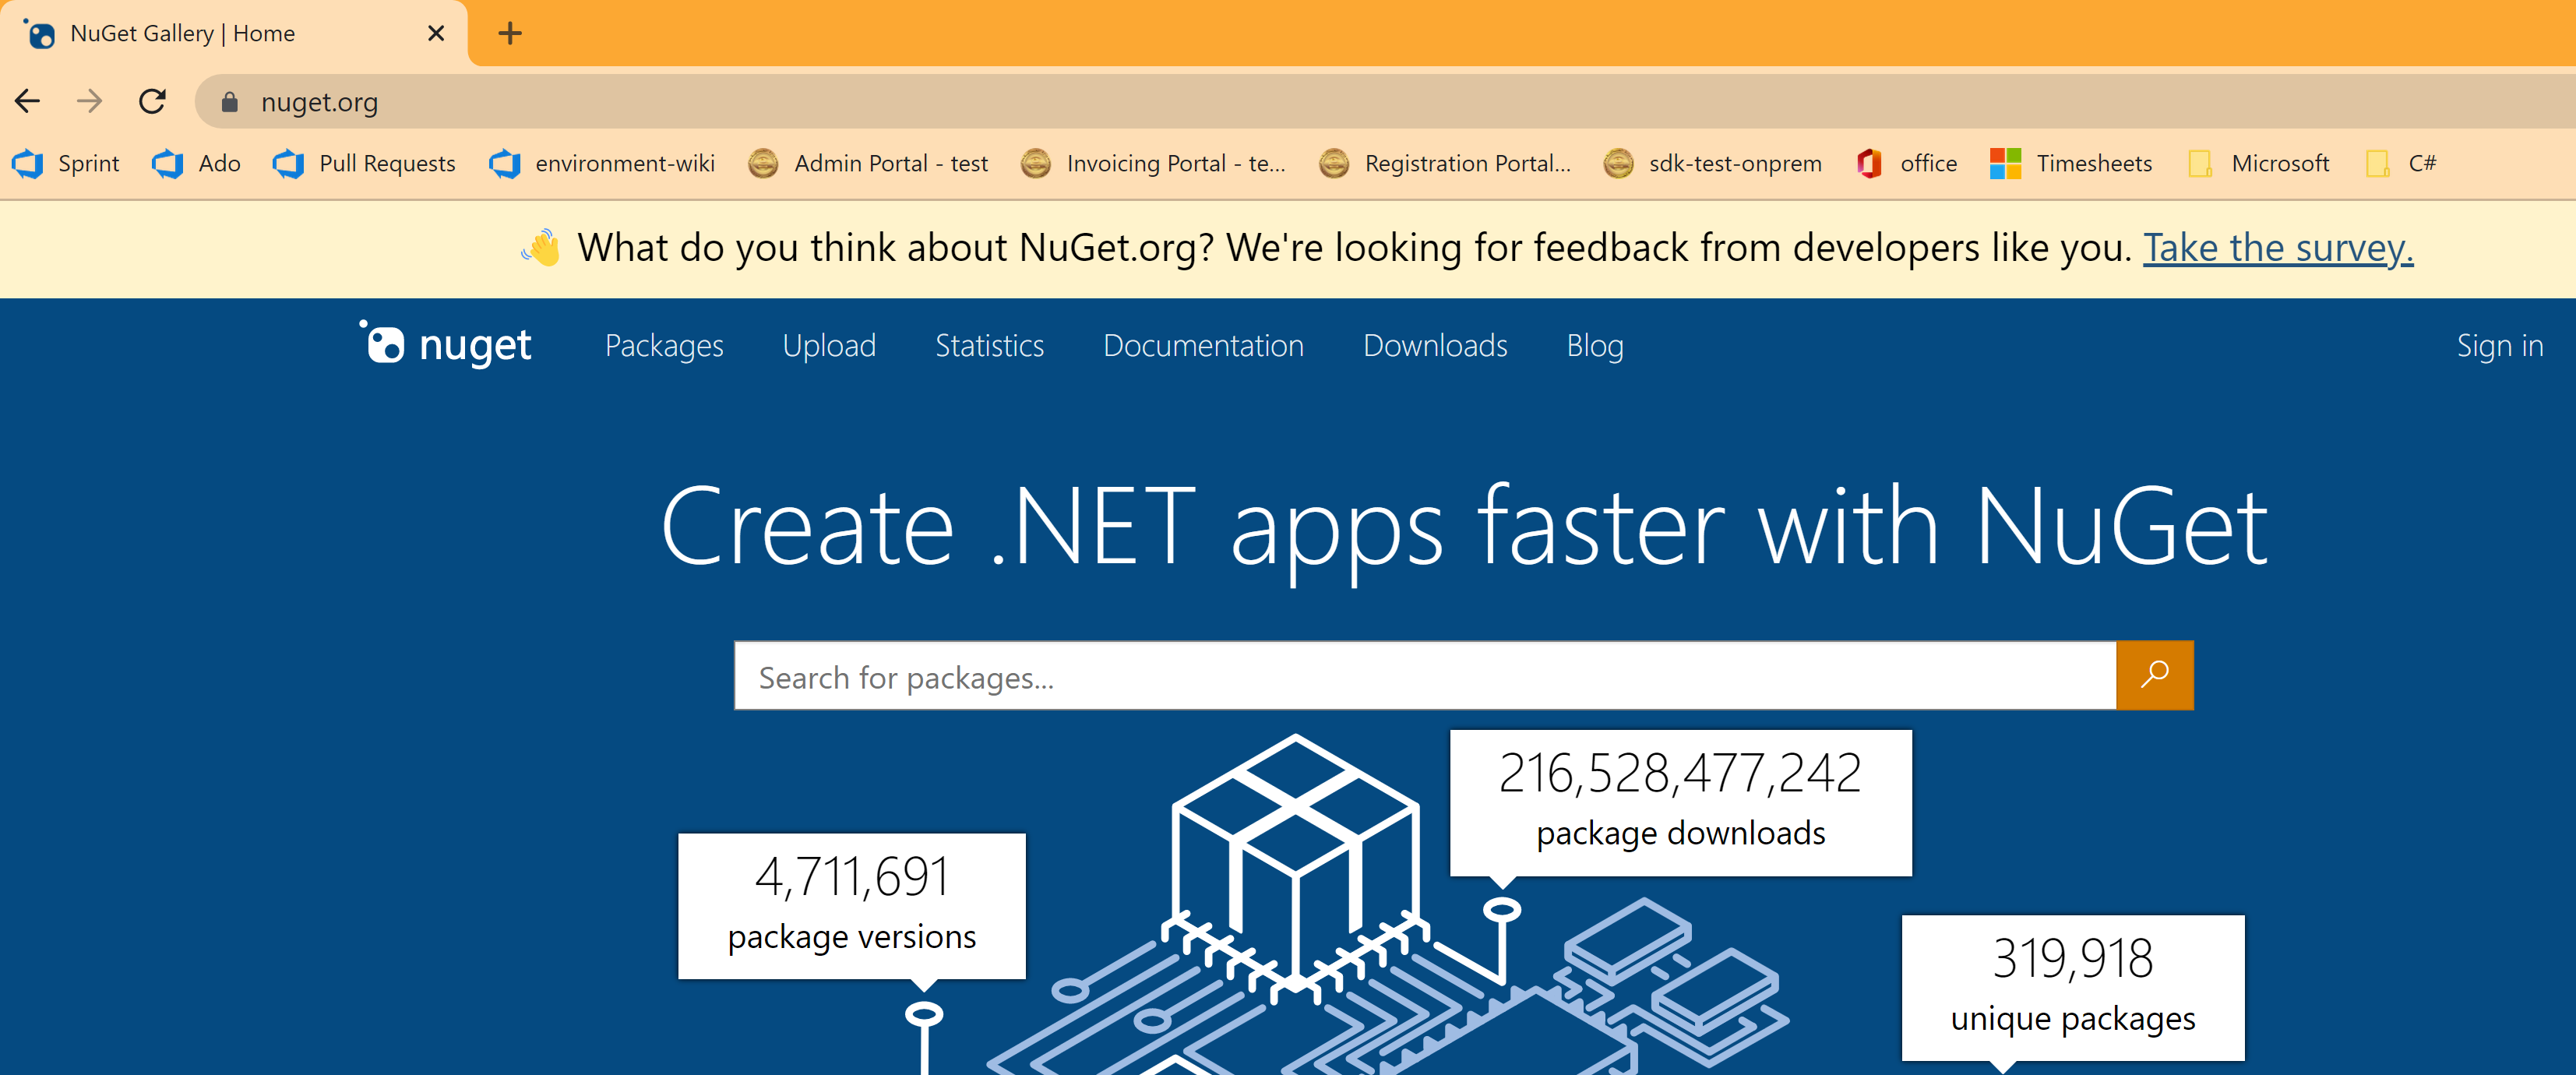 Find toolkit package in Nuget org